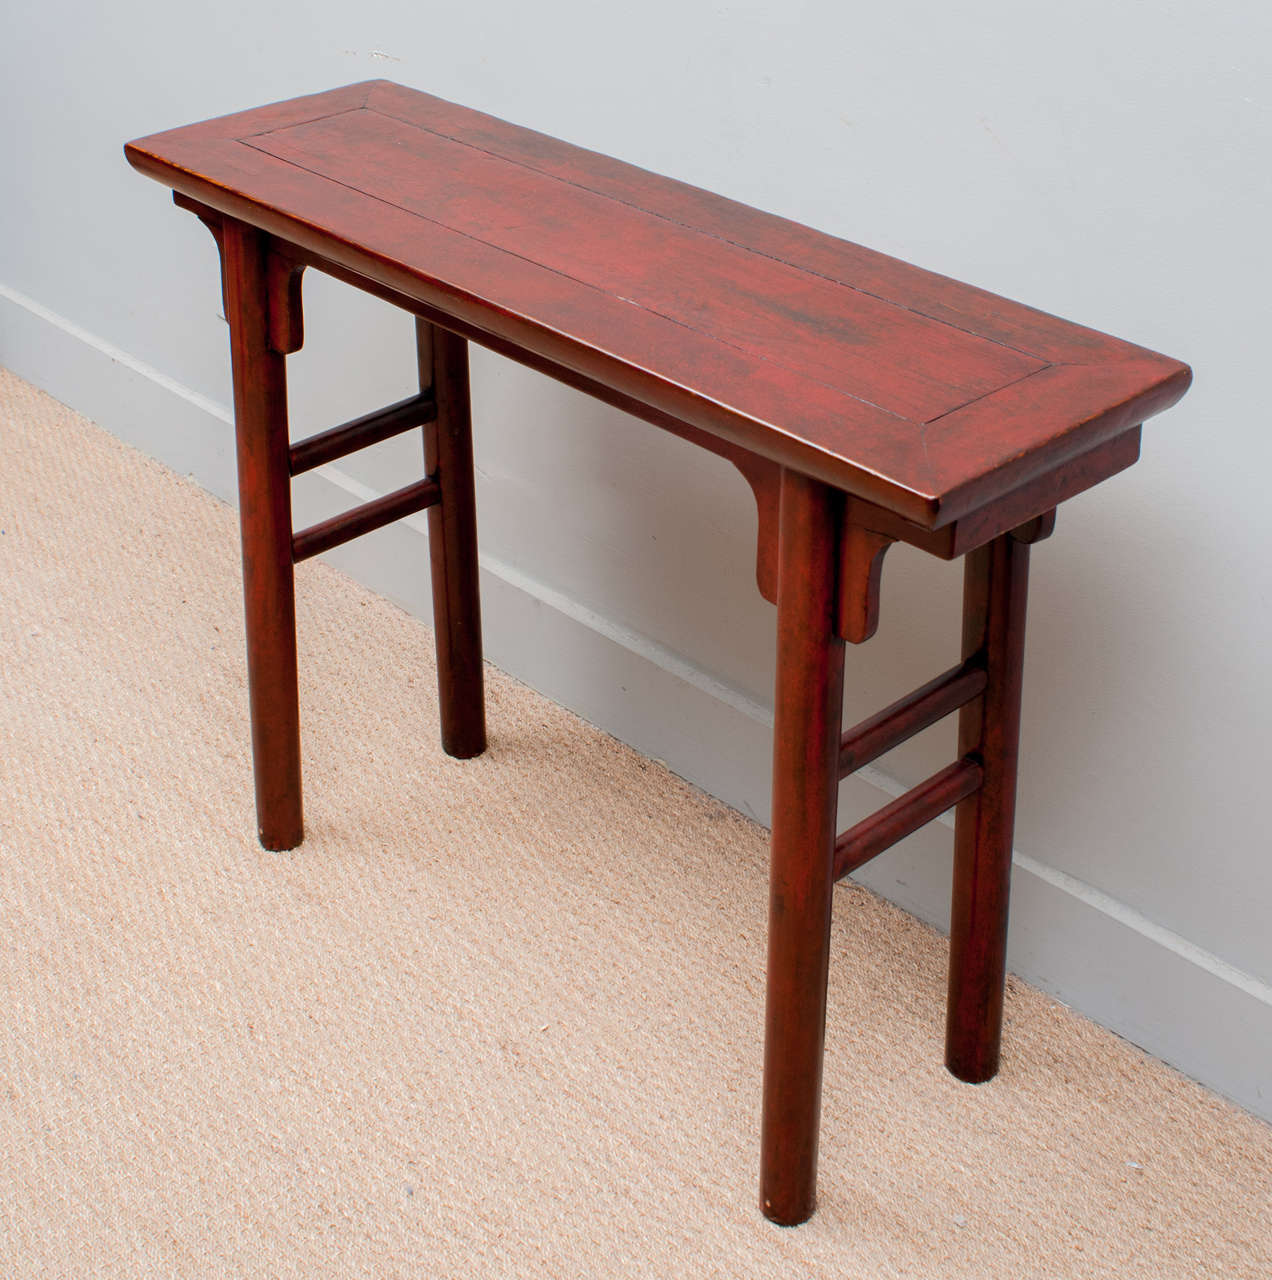 Red Lacquer Flat Top Altar Table , beautifully conserved to highlight the original finish. This 18th century piece is made from the increasingly rare Peachwood.